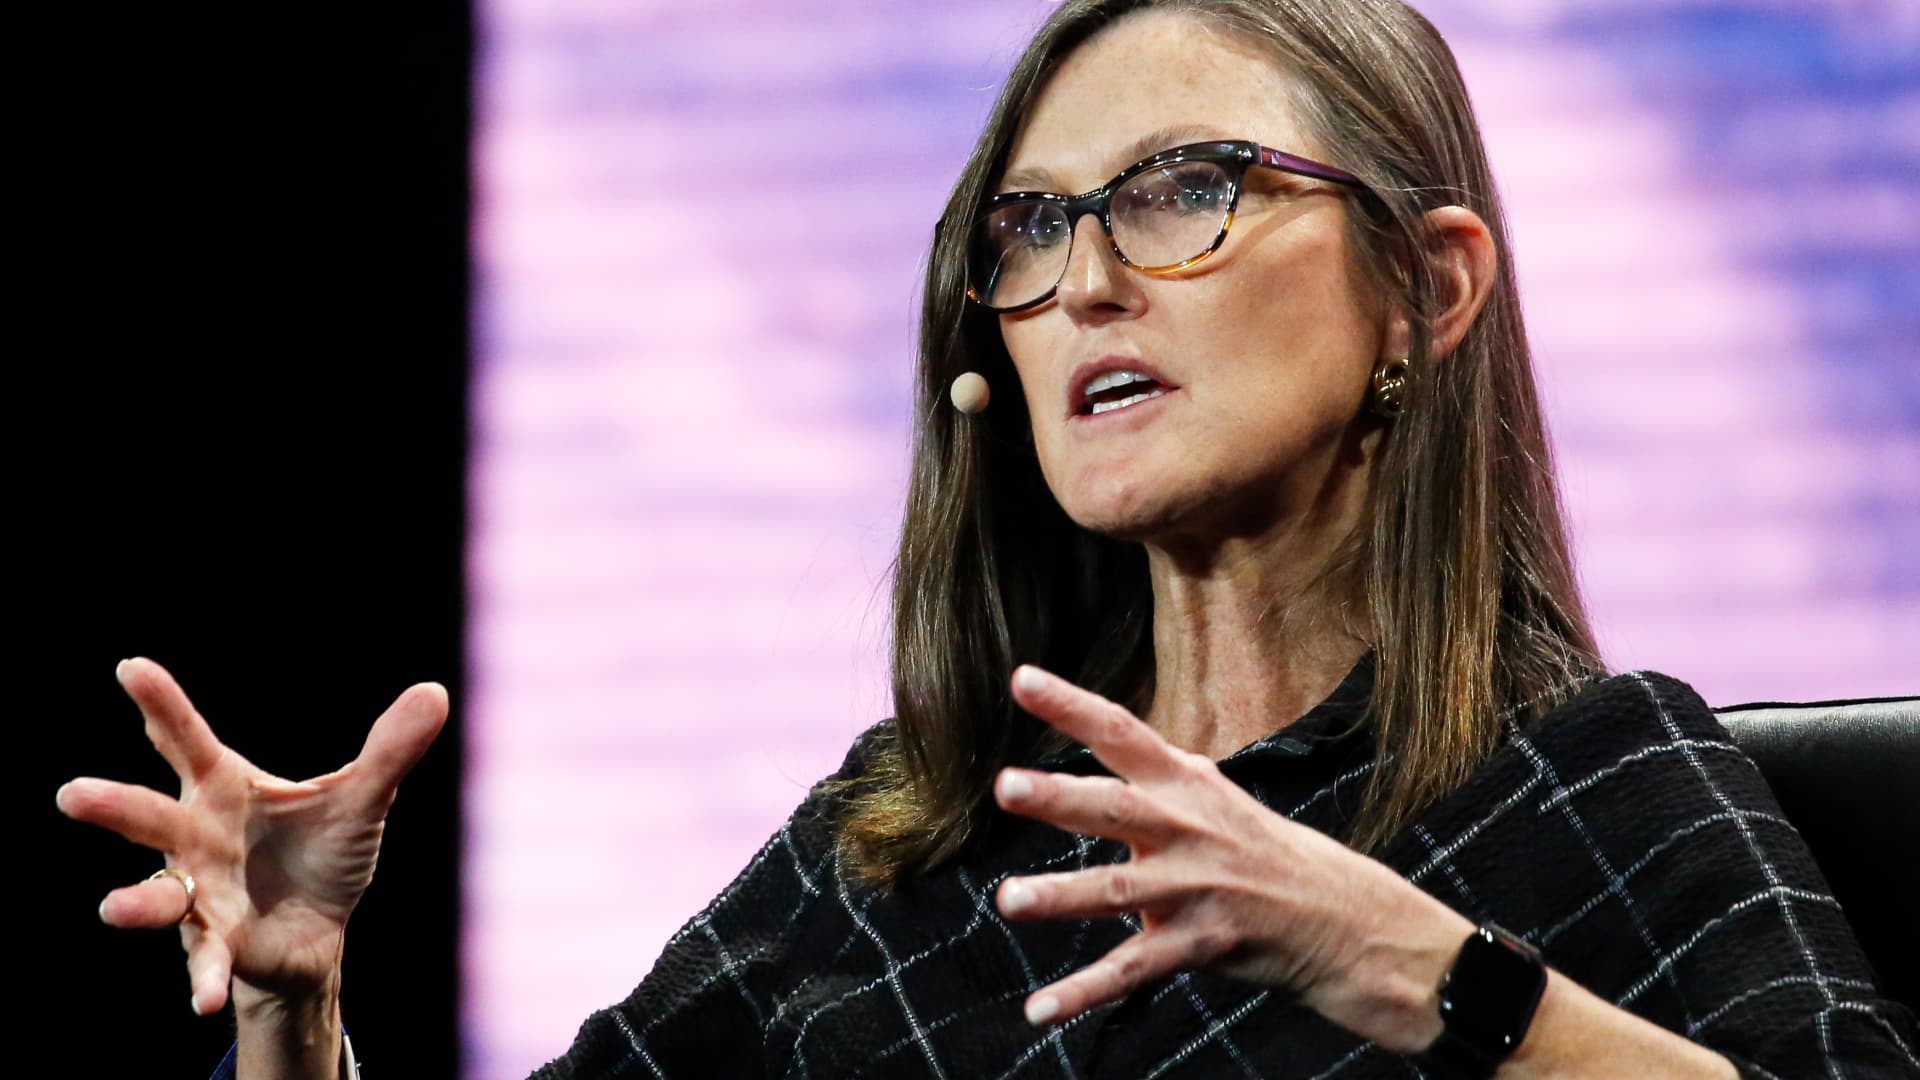 Cathie Wood compares Teladoc to Amazon, says market has it wrong after 40% plunge – CNBC